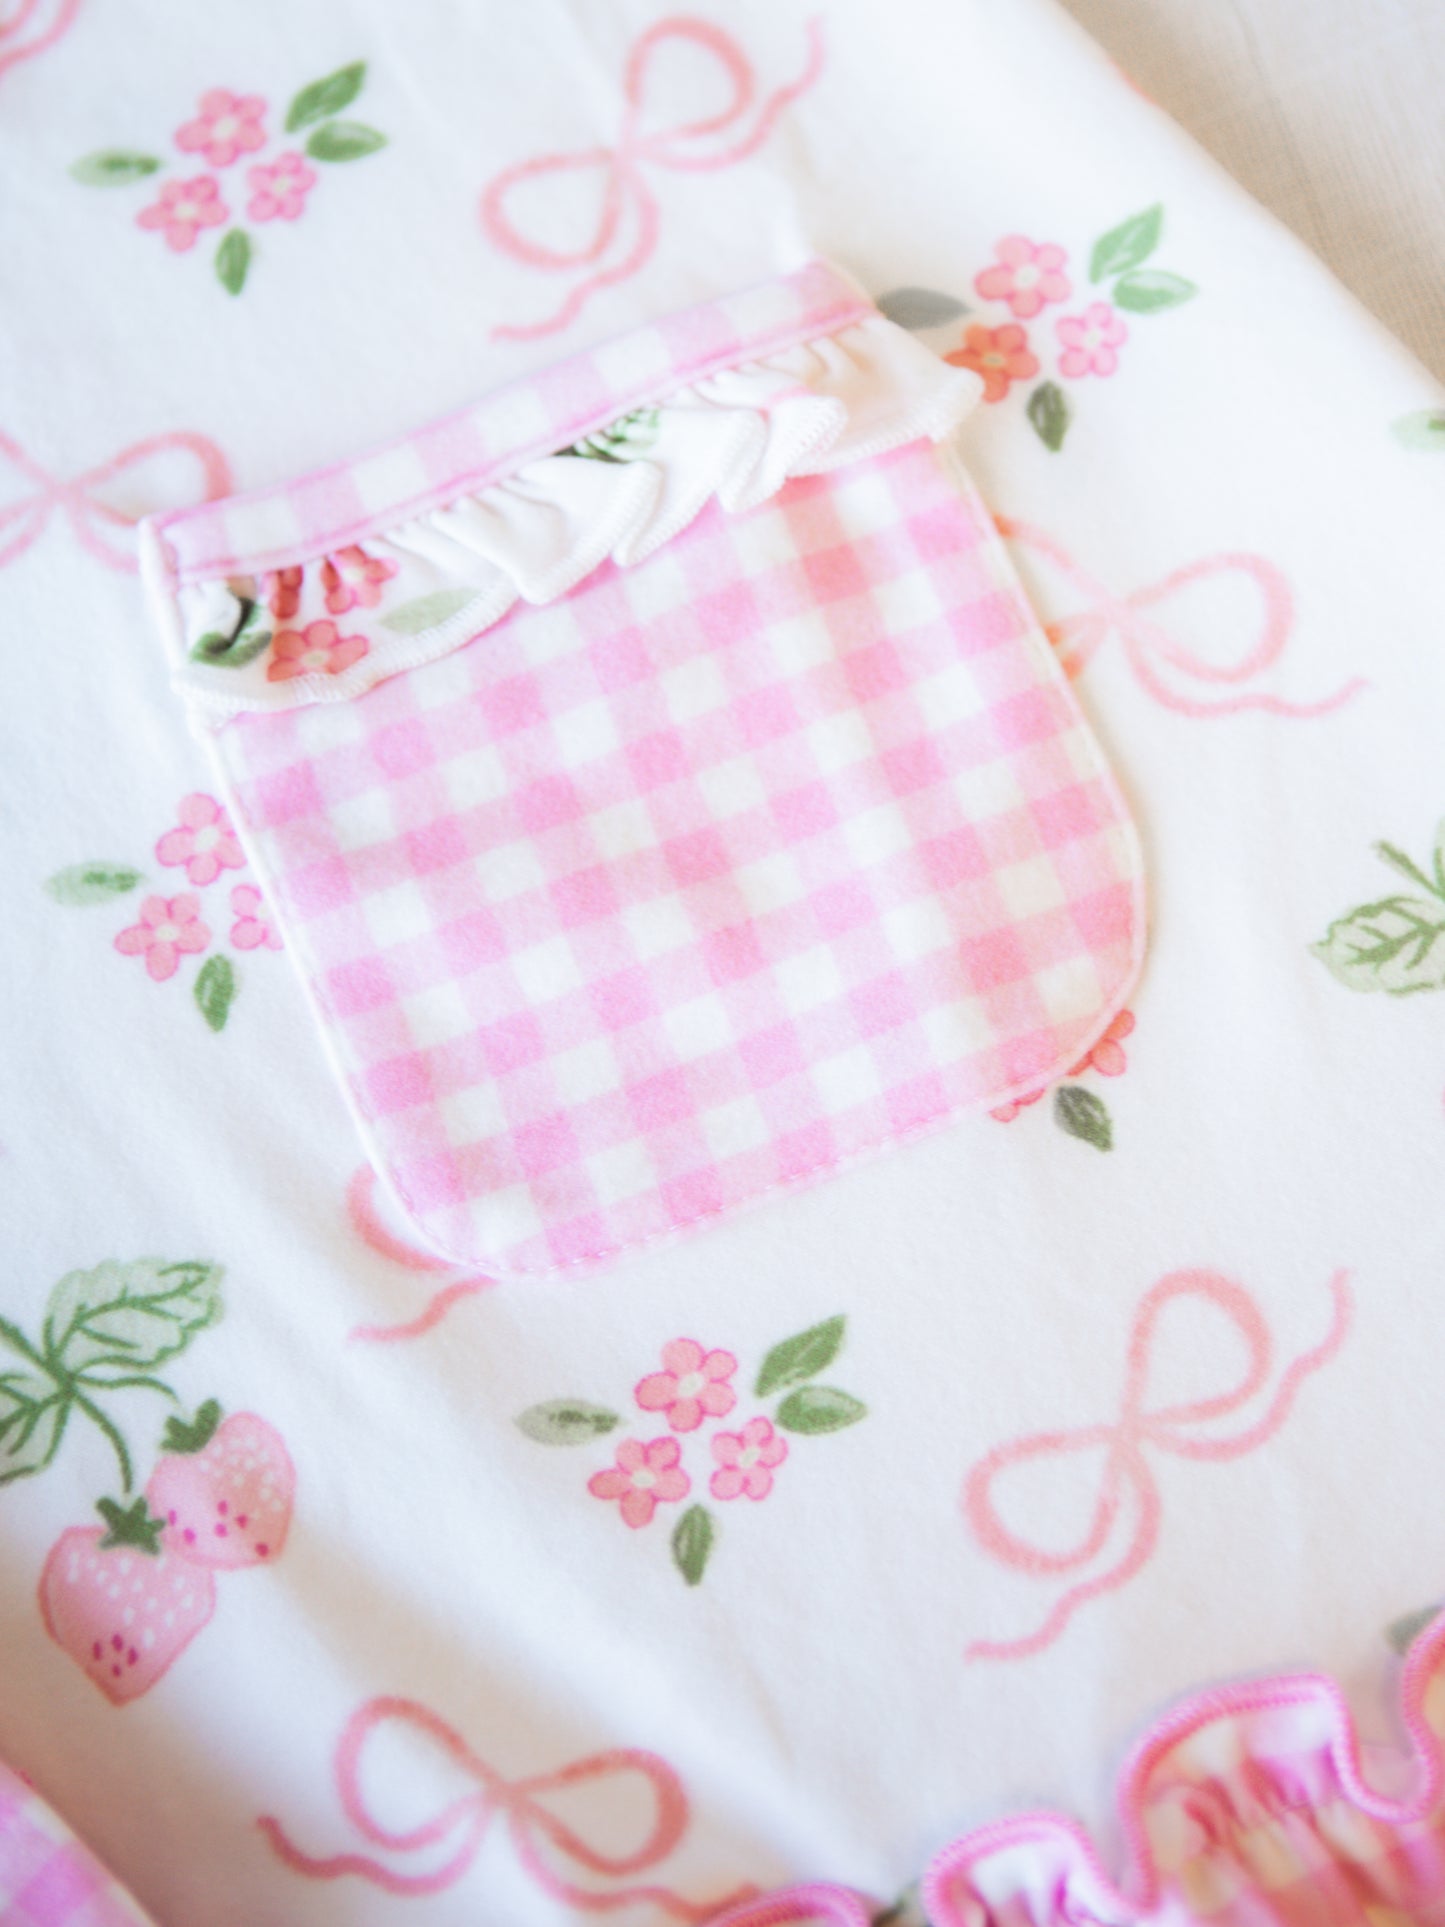 Everyday Play Dress - Pink Berry Bows